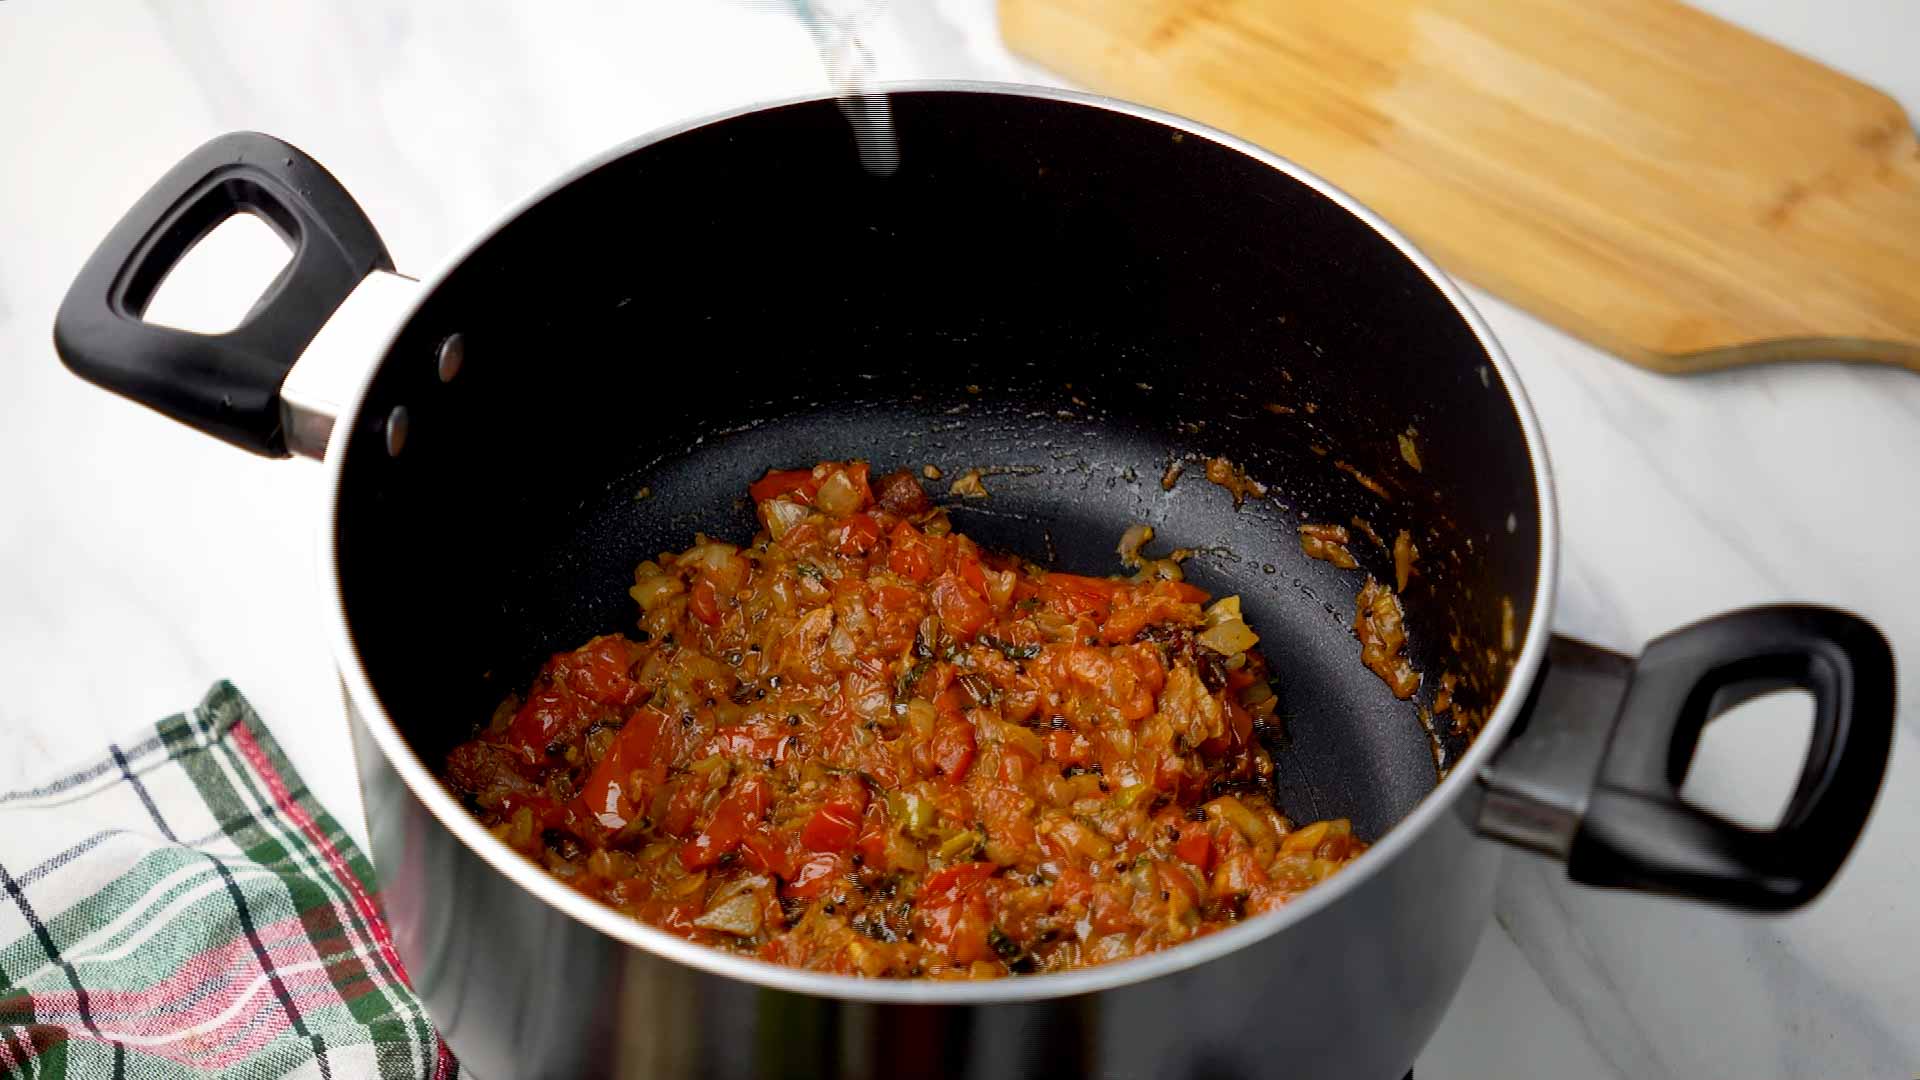 Cook until tomatoes are soft and oil separates.